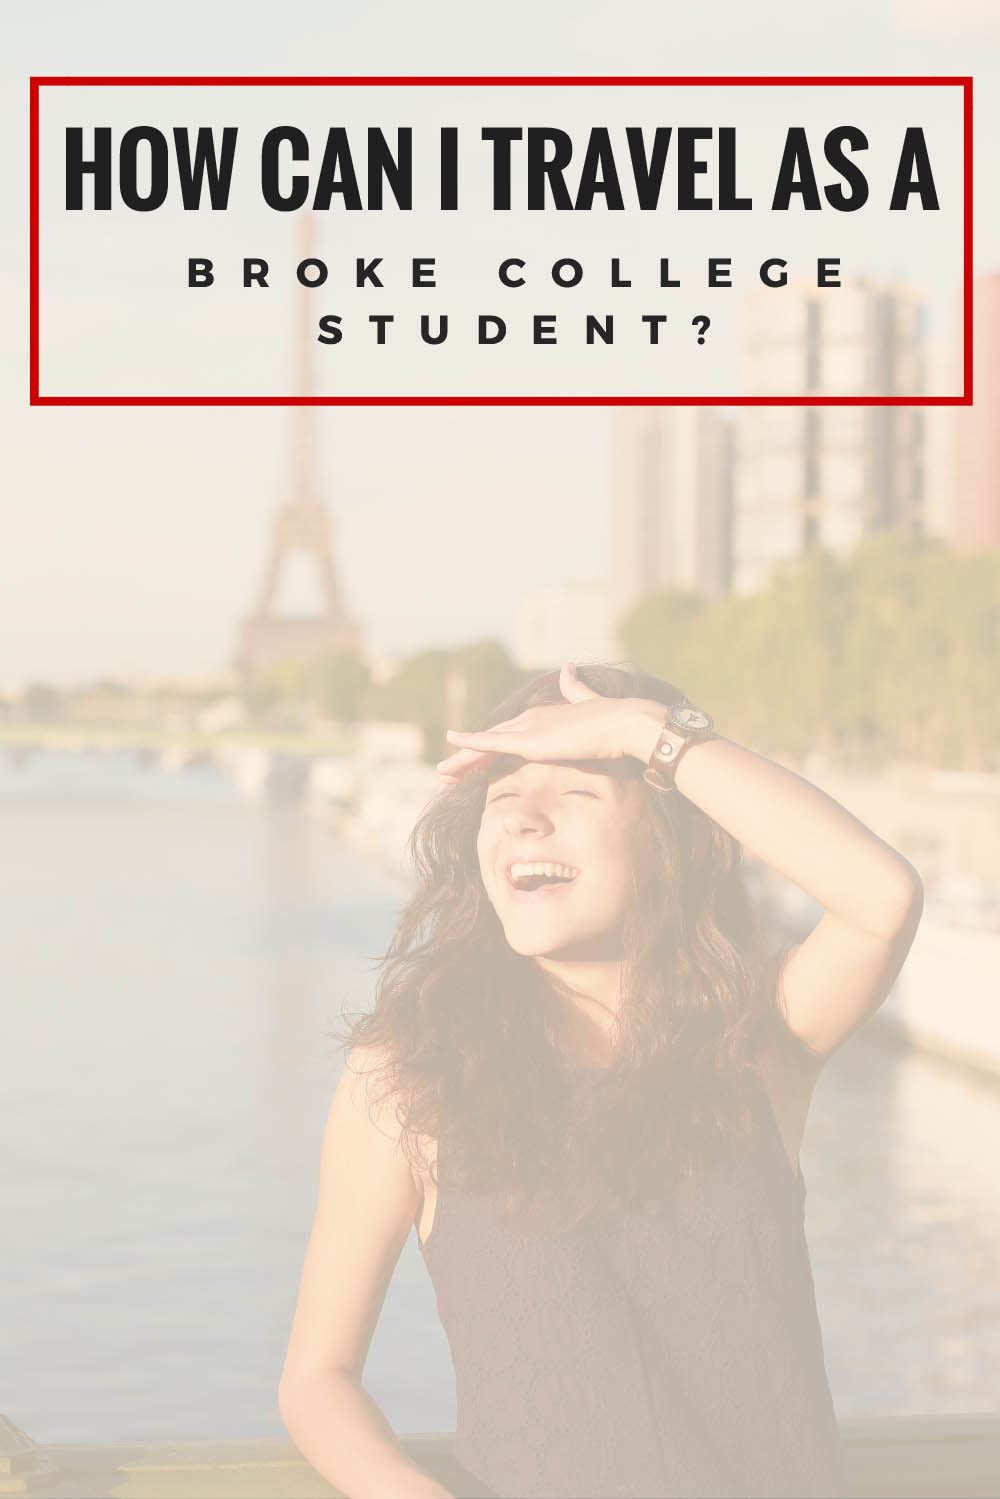 How can I travel as a broke college student?